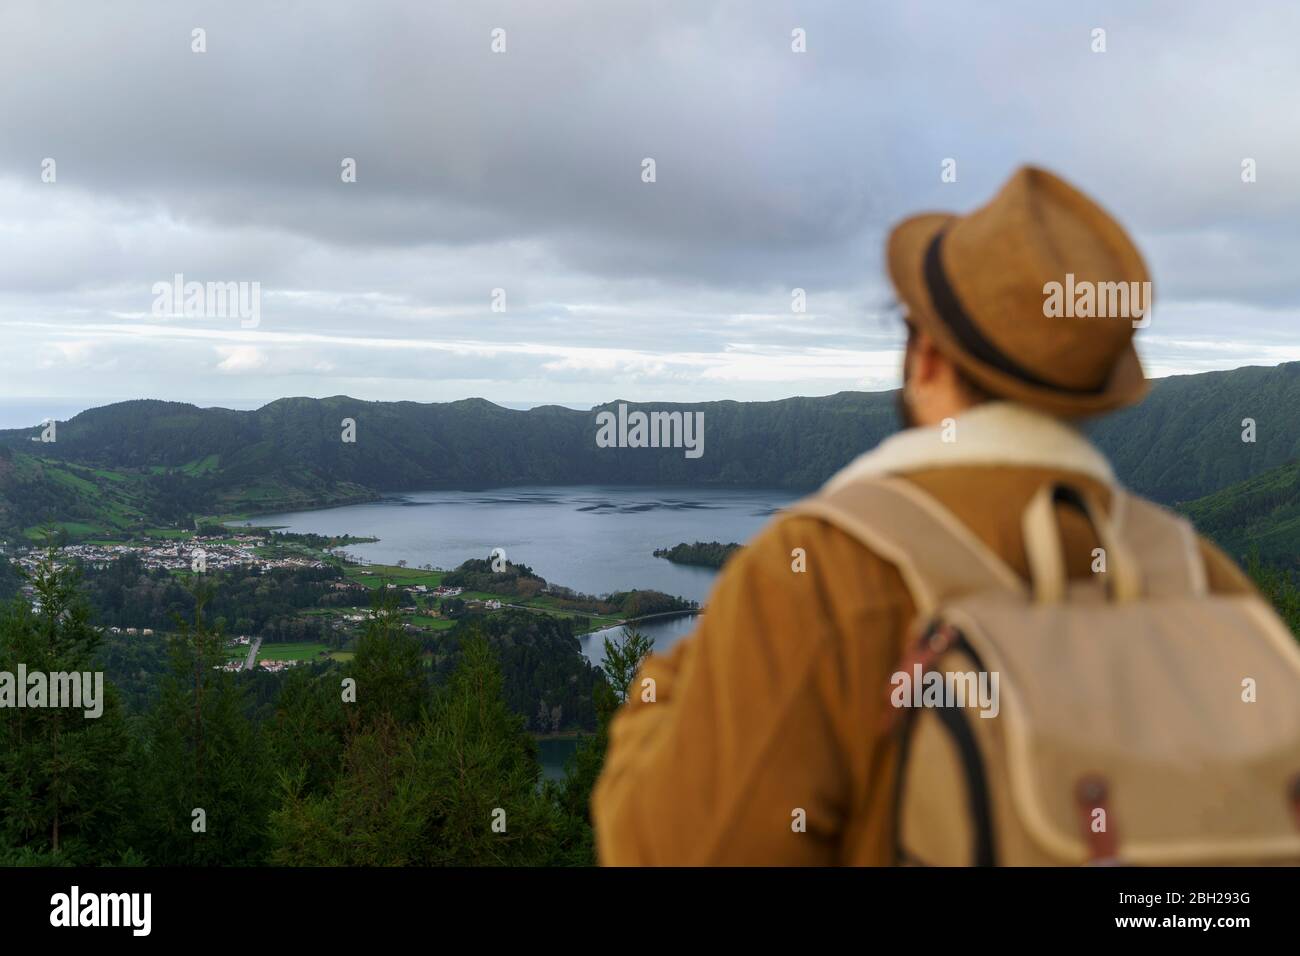 Rear view of man looking at scenic landscape, Sao Miguel Island, Azores, Portugal Stock Photo